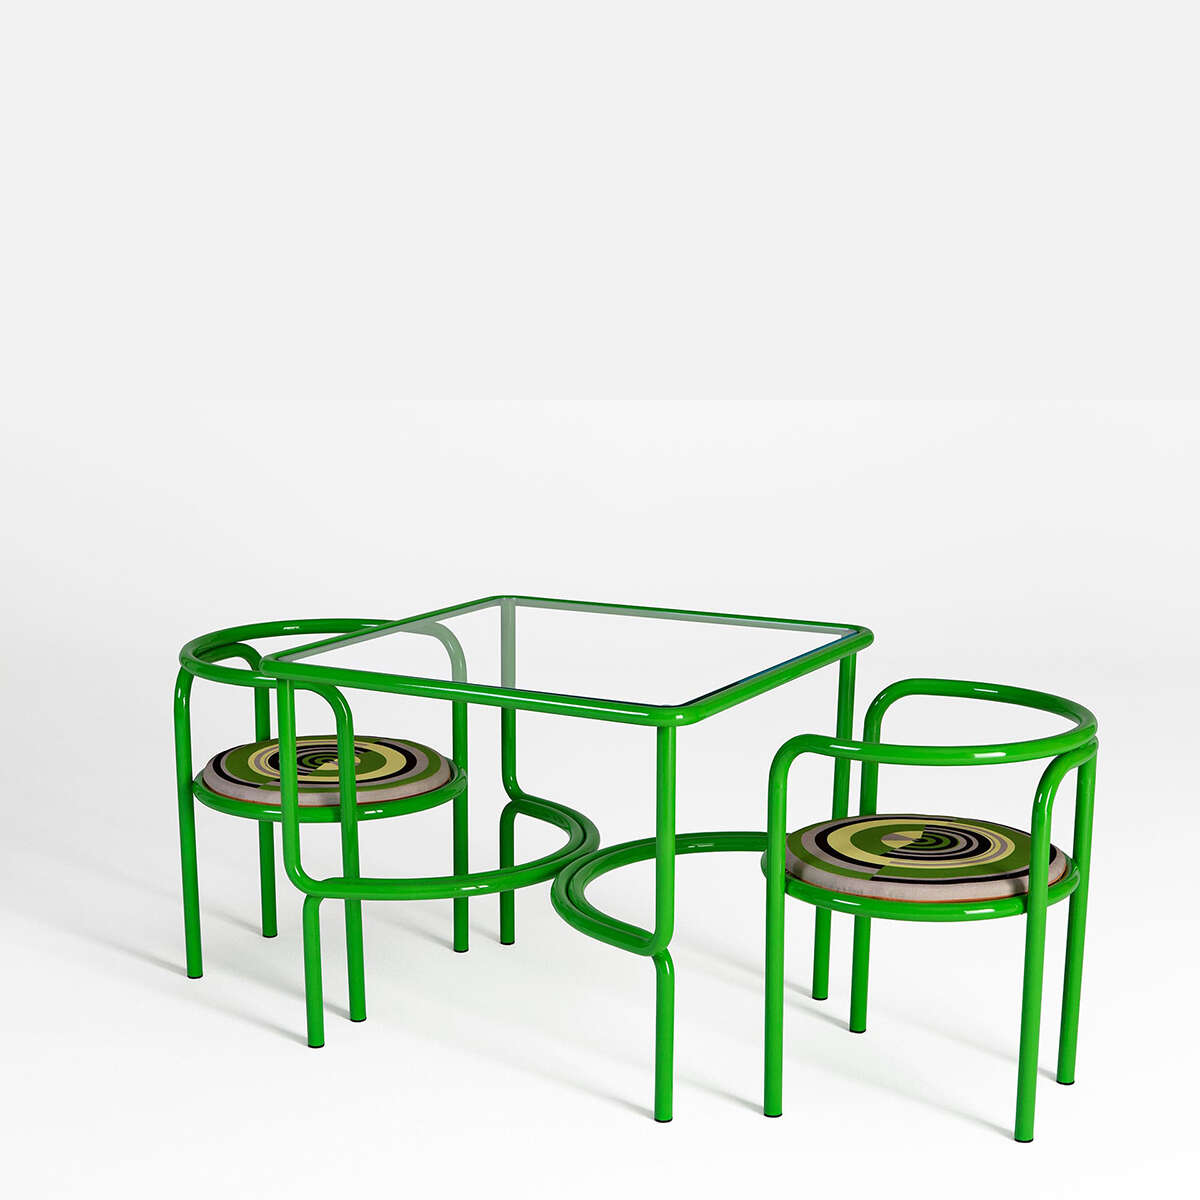 Exteta Locus Solus Chair 1 and table The Modern Garden Co